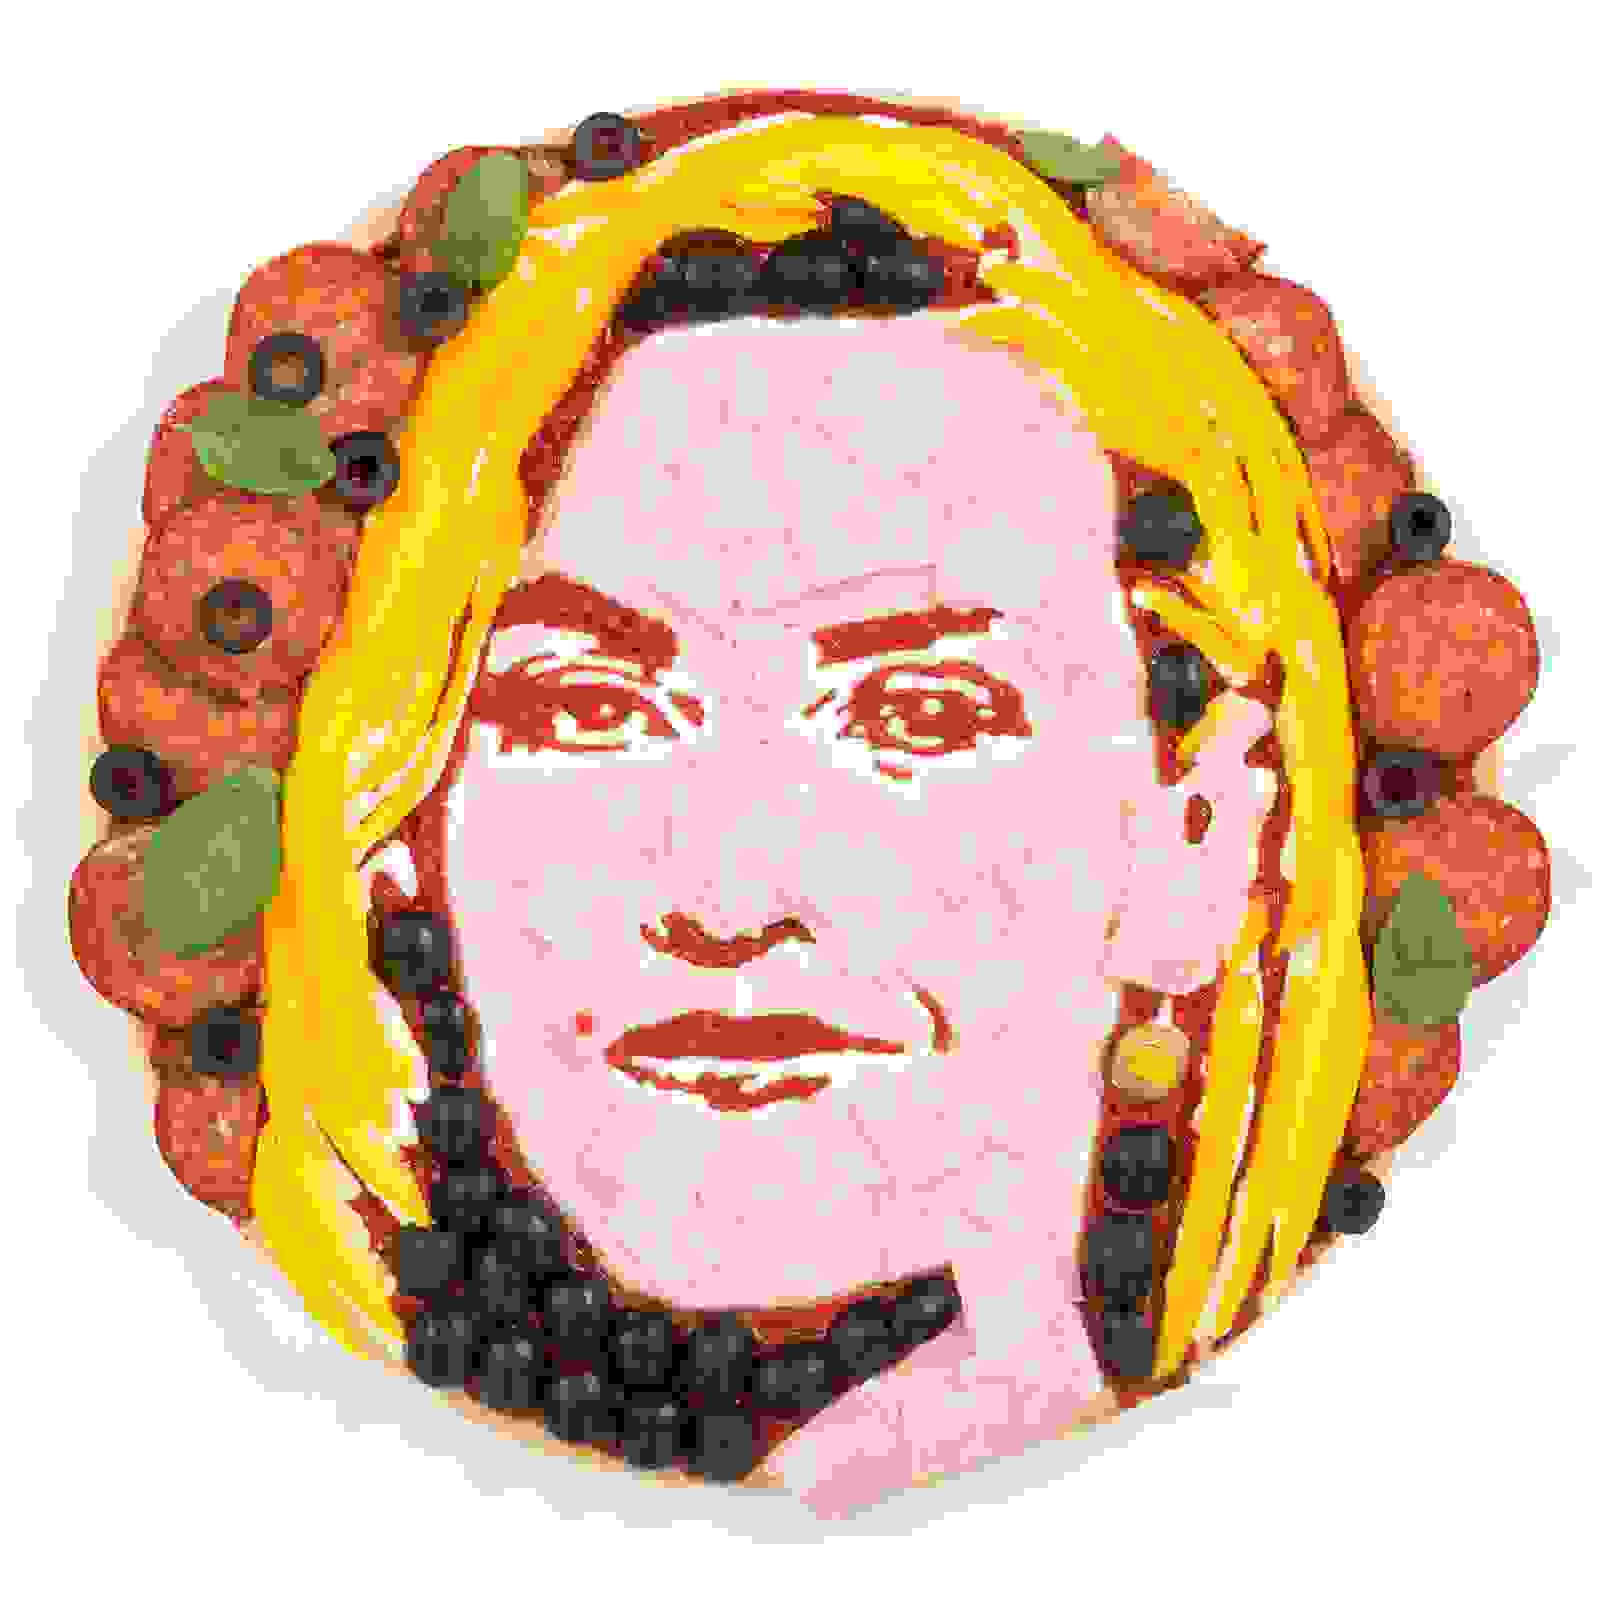 Kate Winslet Pizza